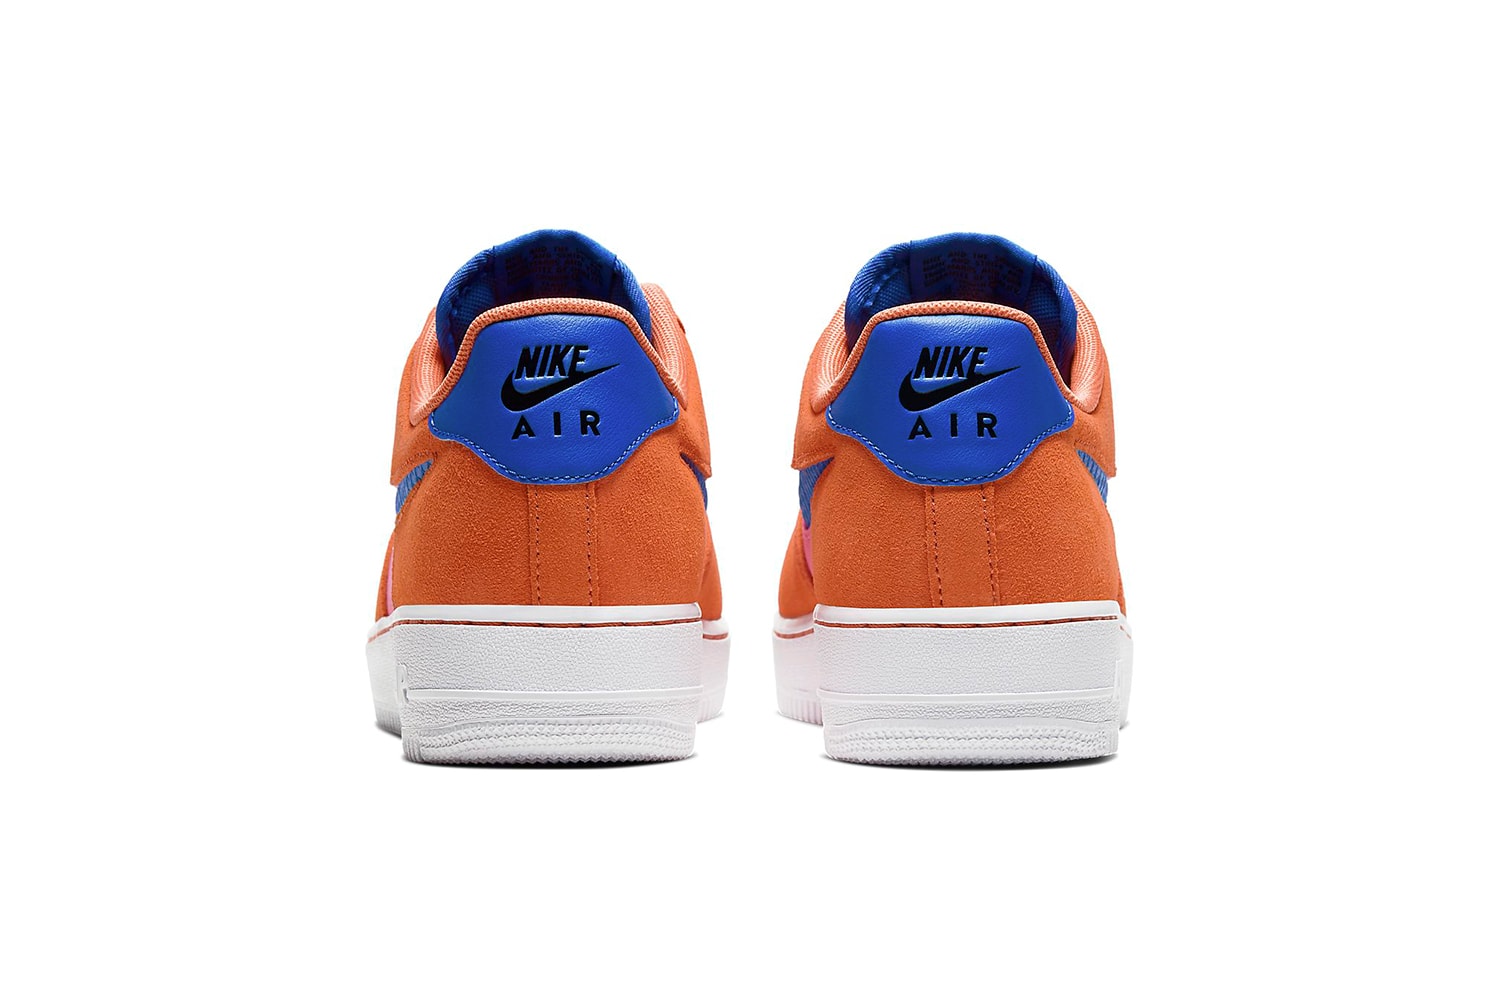 Nike Air Force 1 ’07 LV8 "Orange Trance" Release Info Color: Orange Trance/Lotus Pink/White/Pacific Blue Style Code: CW7300-800 low drop date price details 